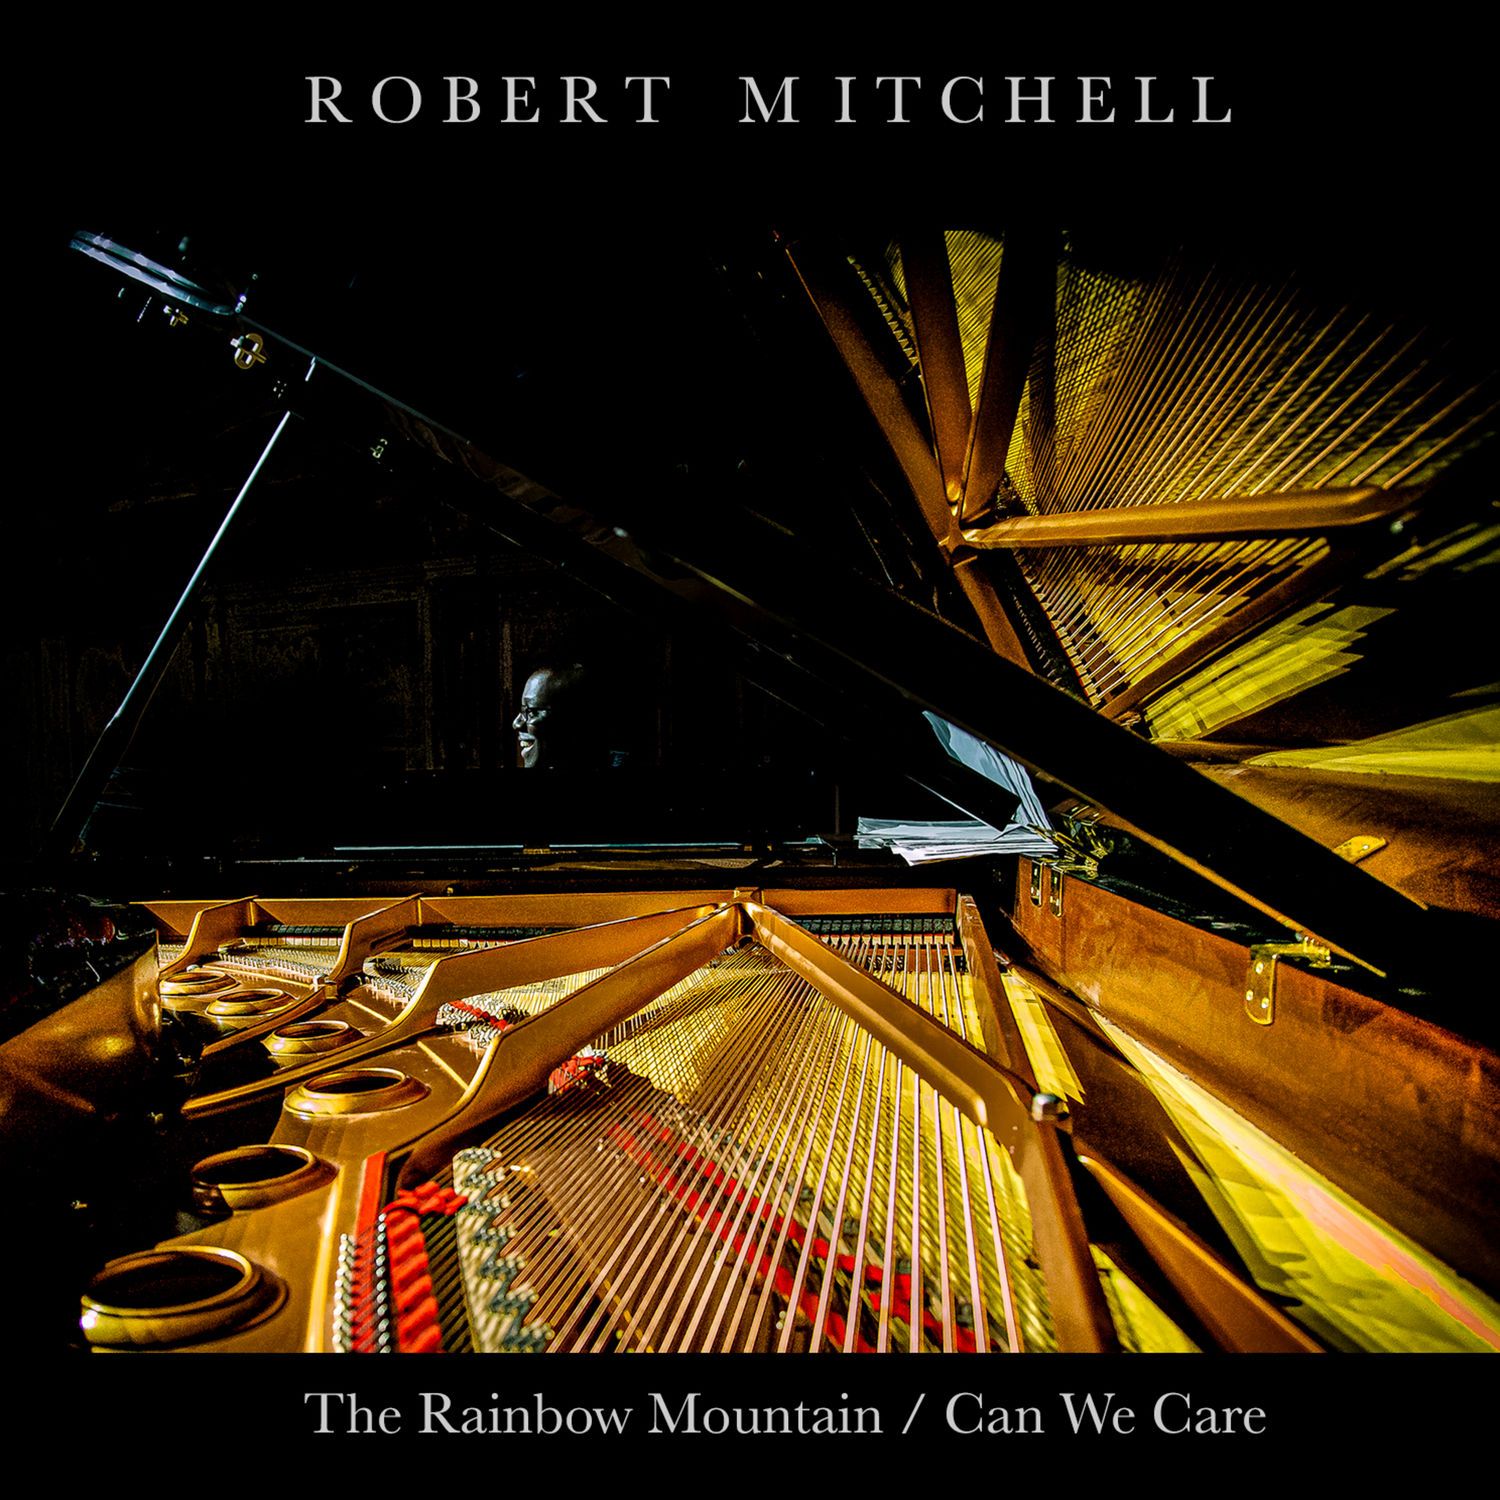 Robert Mitchell - The Rainbow Mountain / Can We Care (2020) [FLAC 24bit/44,1kHz]